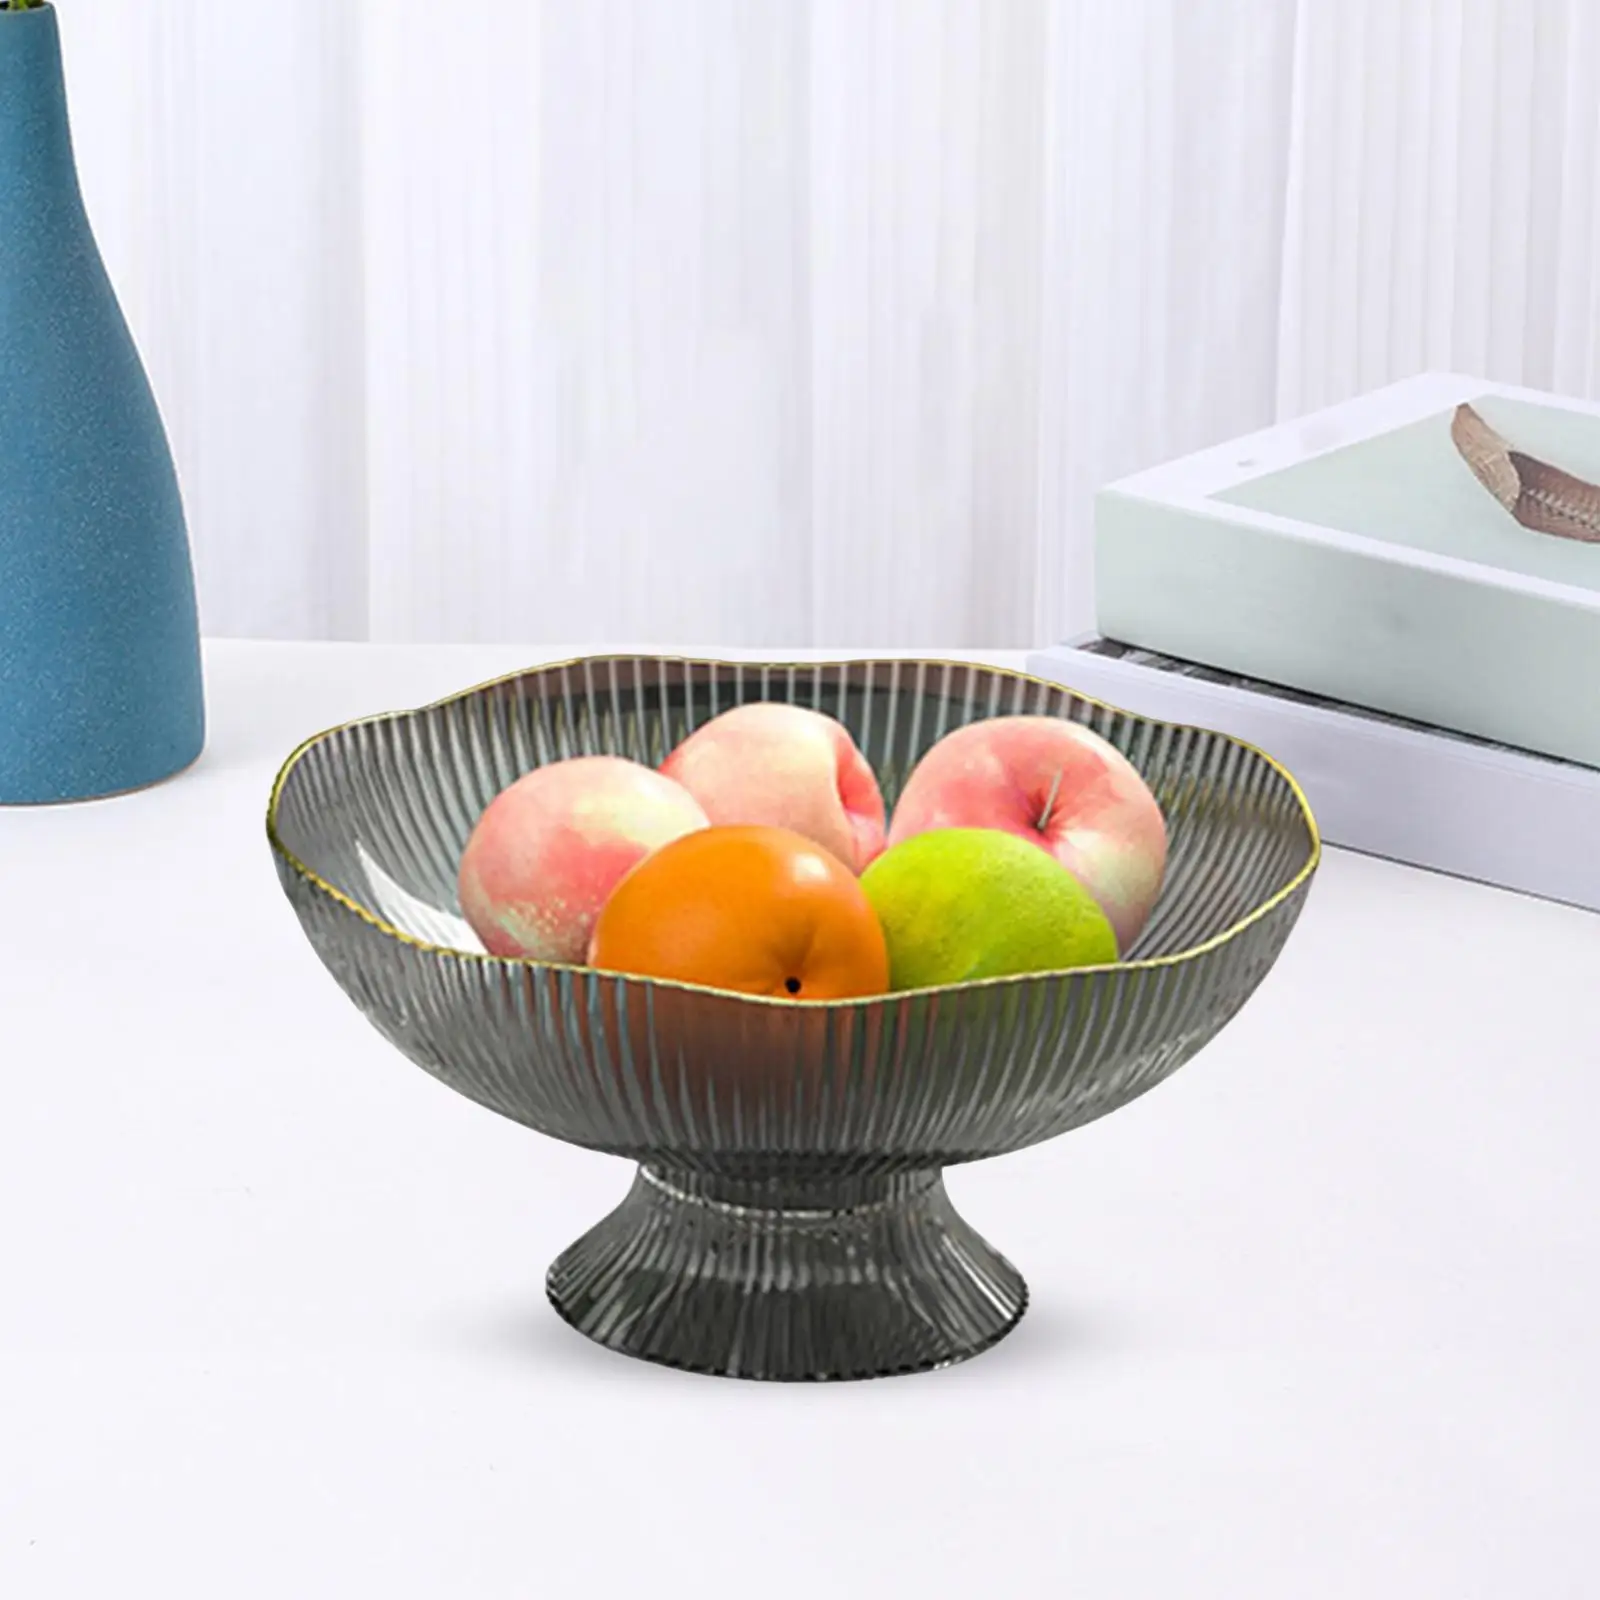 Fruit Bowl Dessert Display Stand with Draining Holes Dish Holder Snacks Fruit Basket Bowl for Kitchen Countertop Home Ornaments